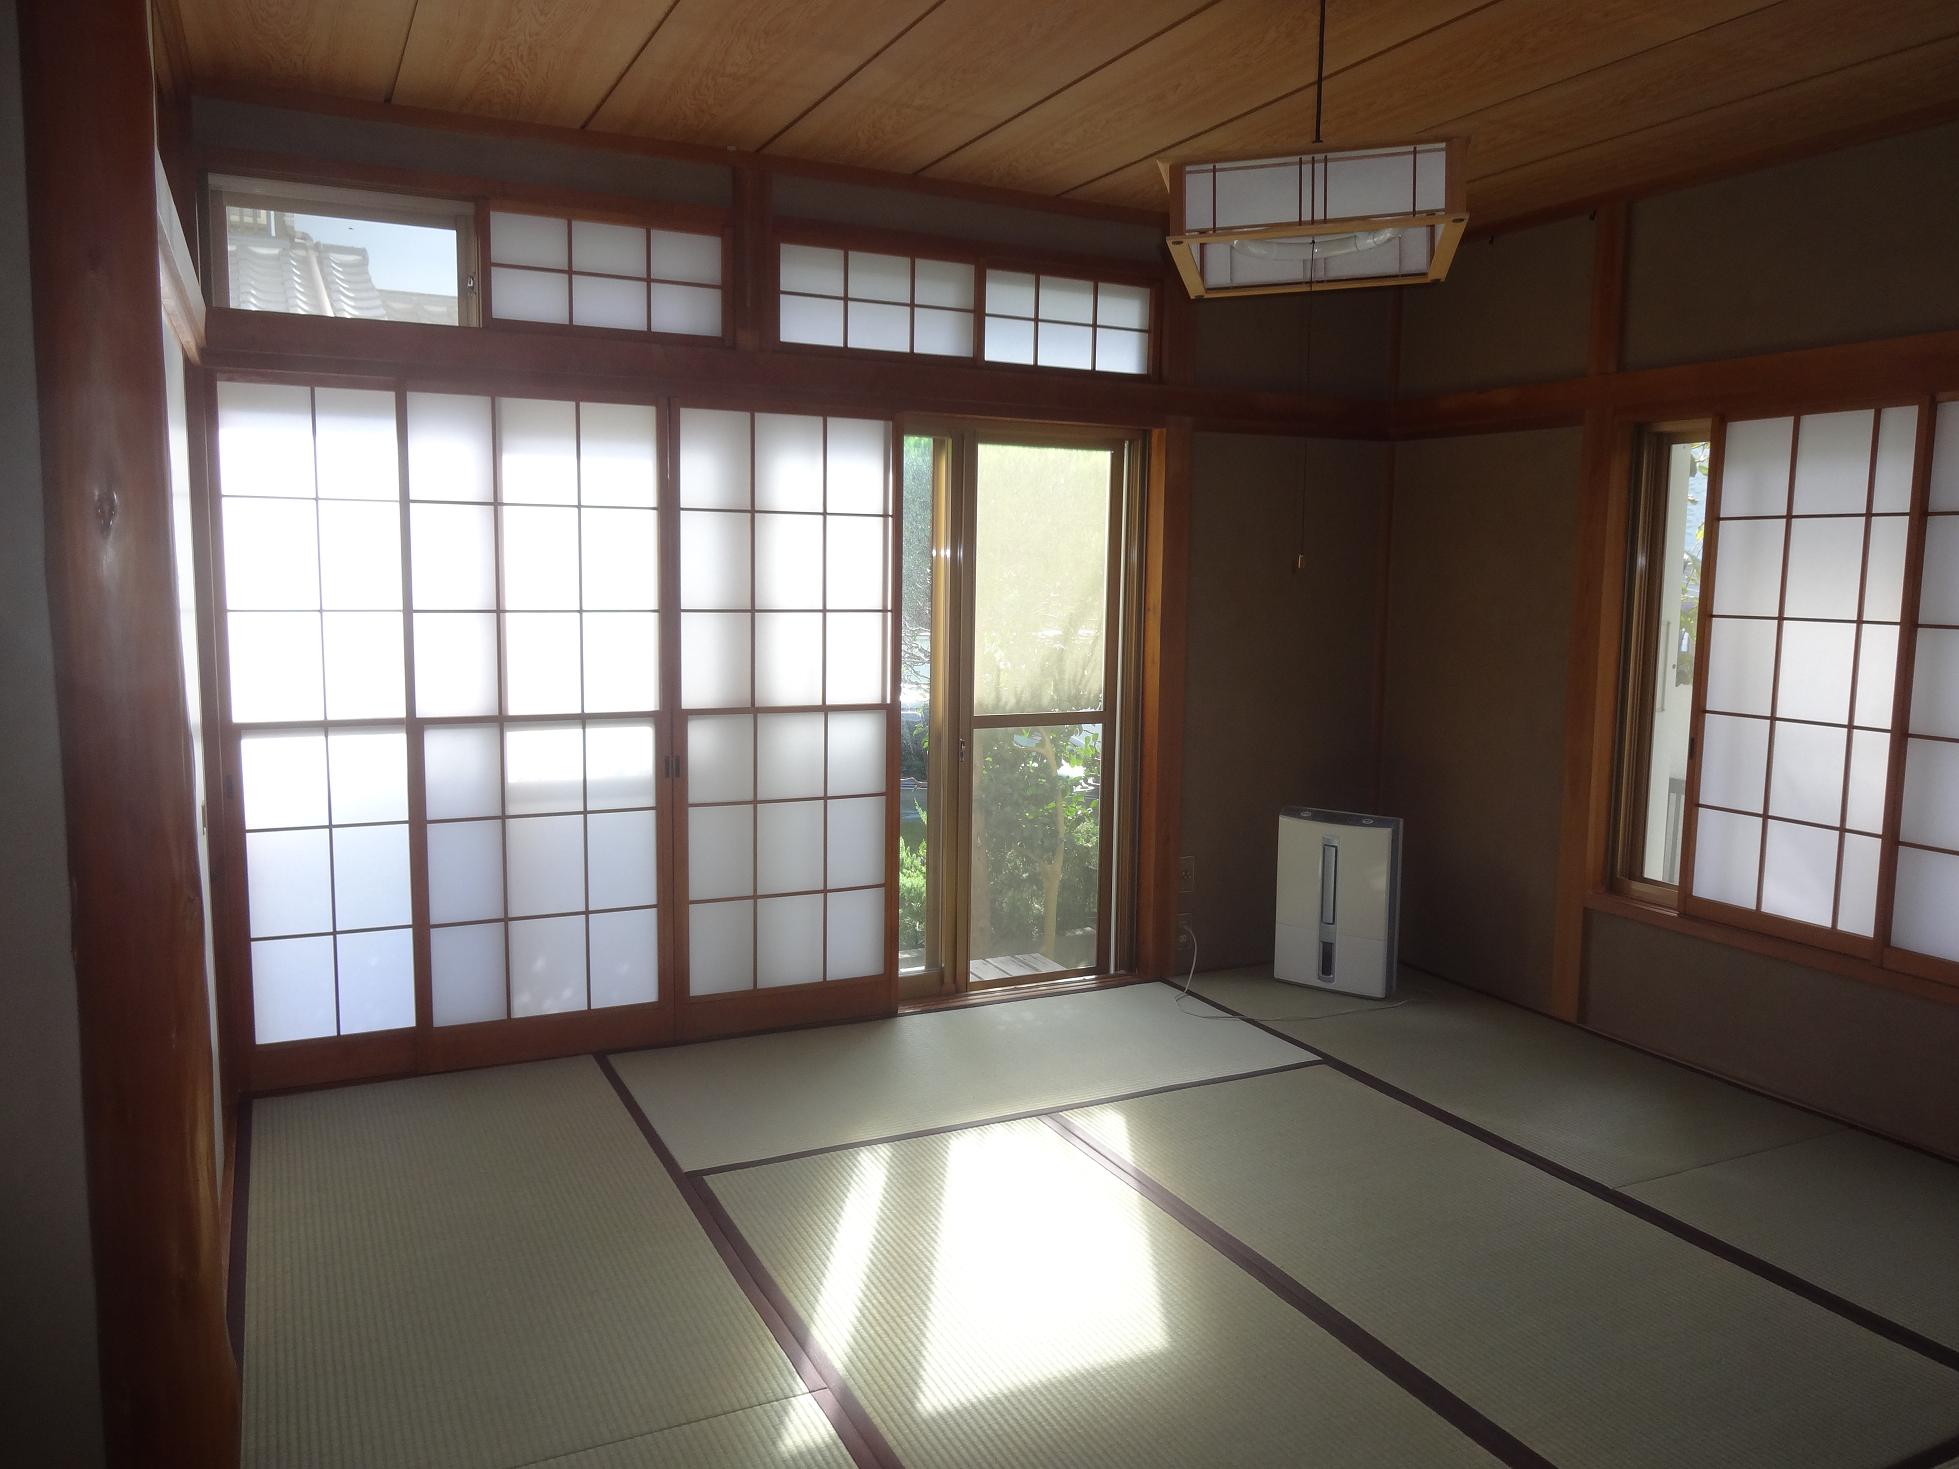 Other room space. First floor Japanese-style room 8 tatami mats